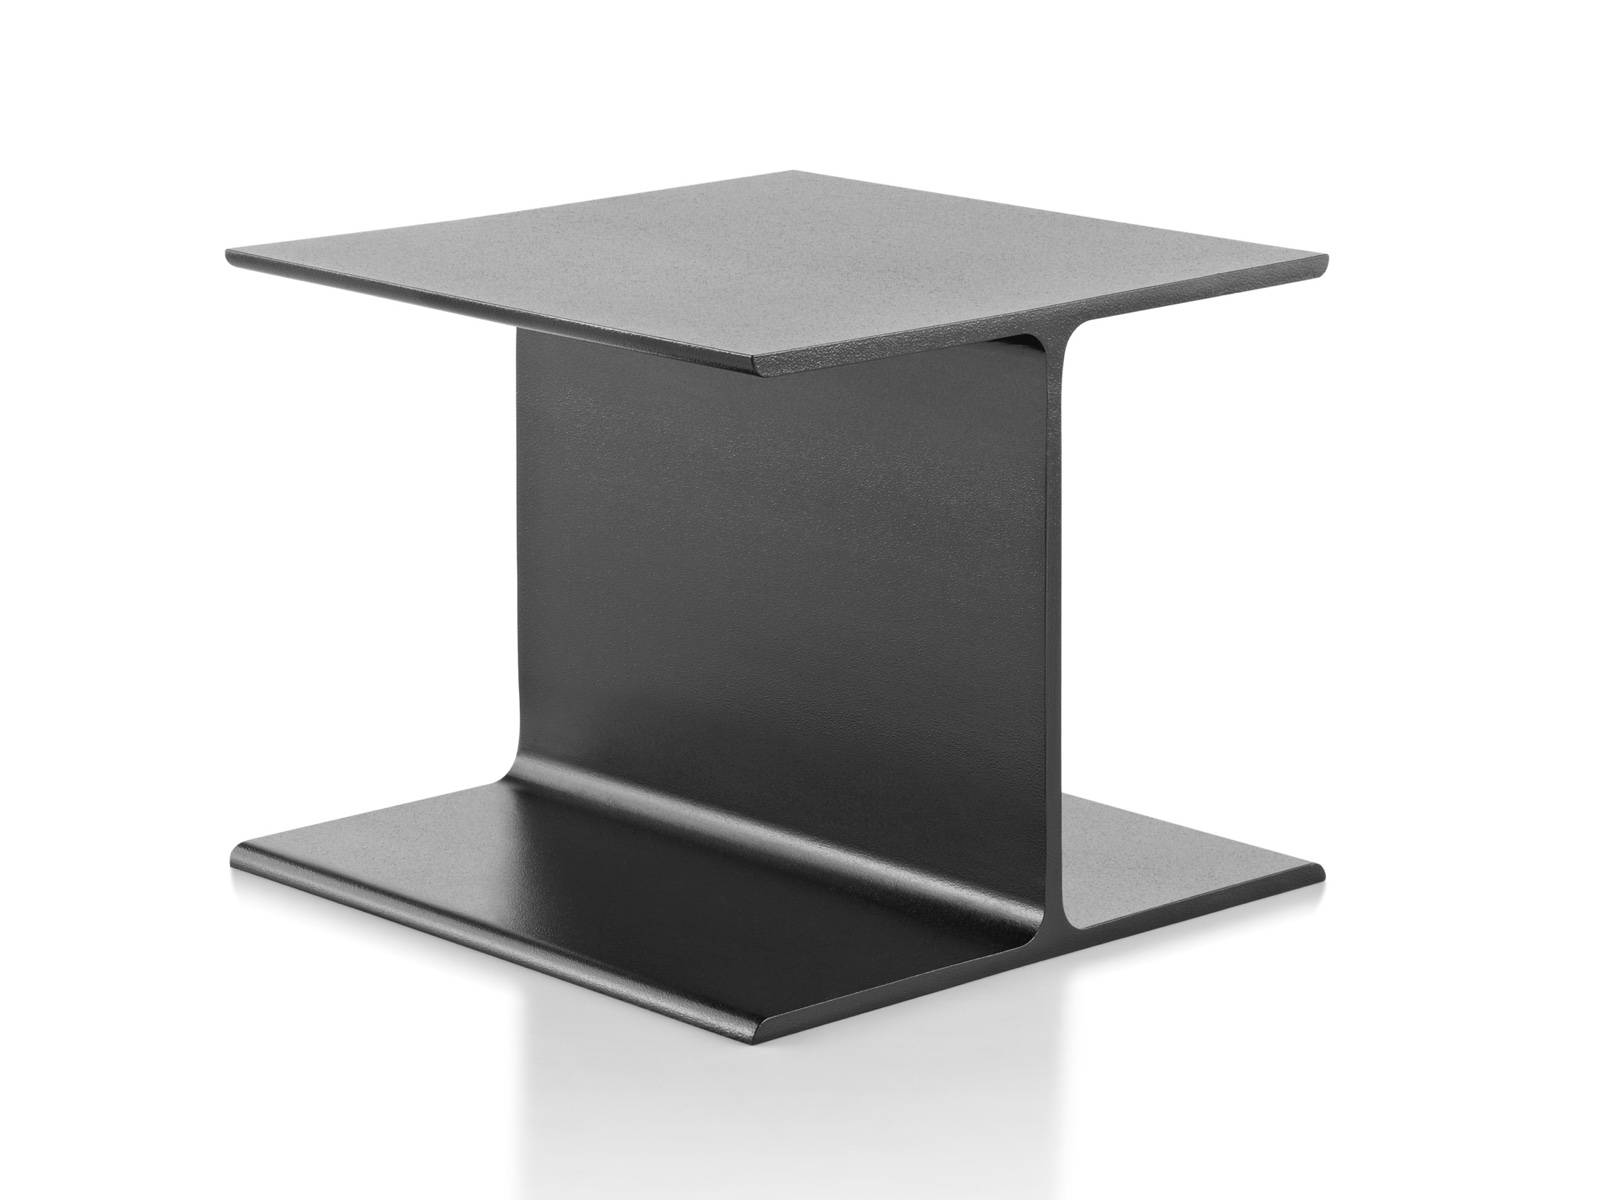 An angled view of a cast aluminum I Beam occasional table with a bare top. 